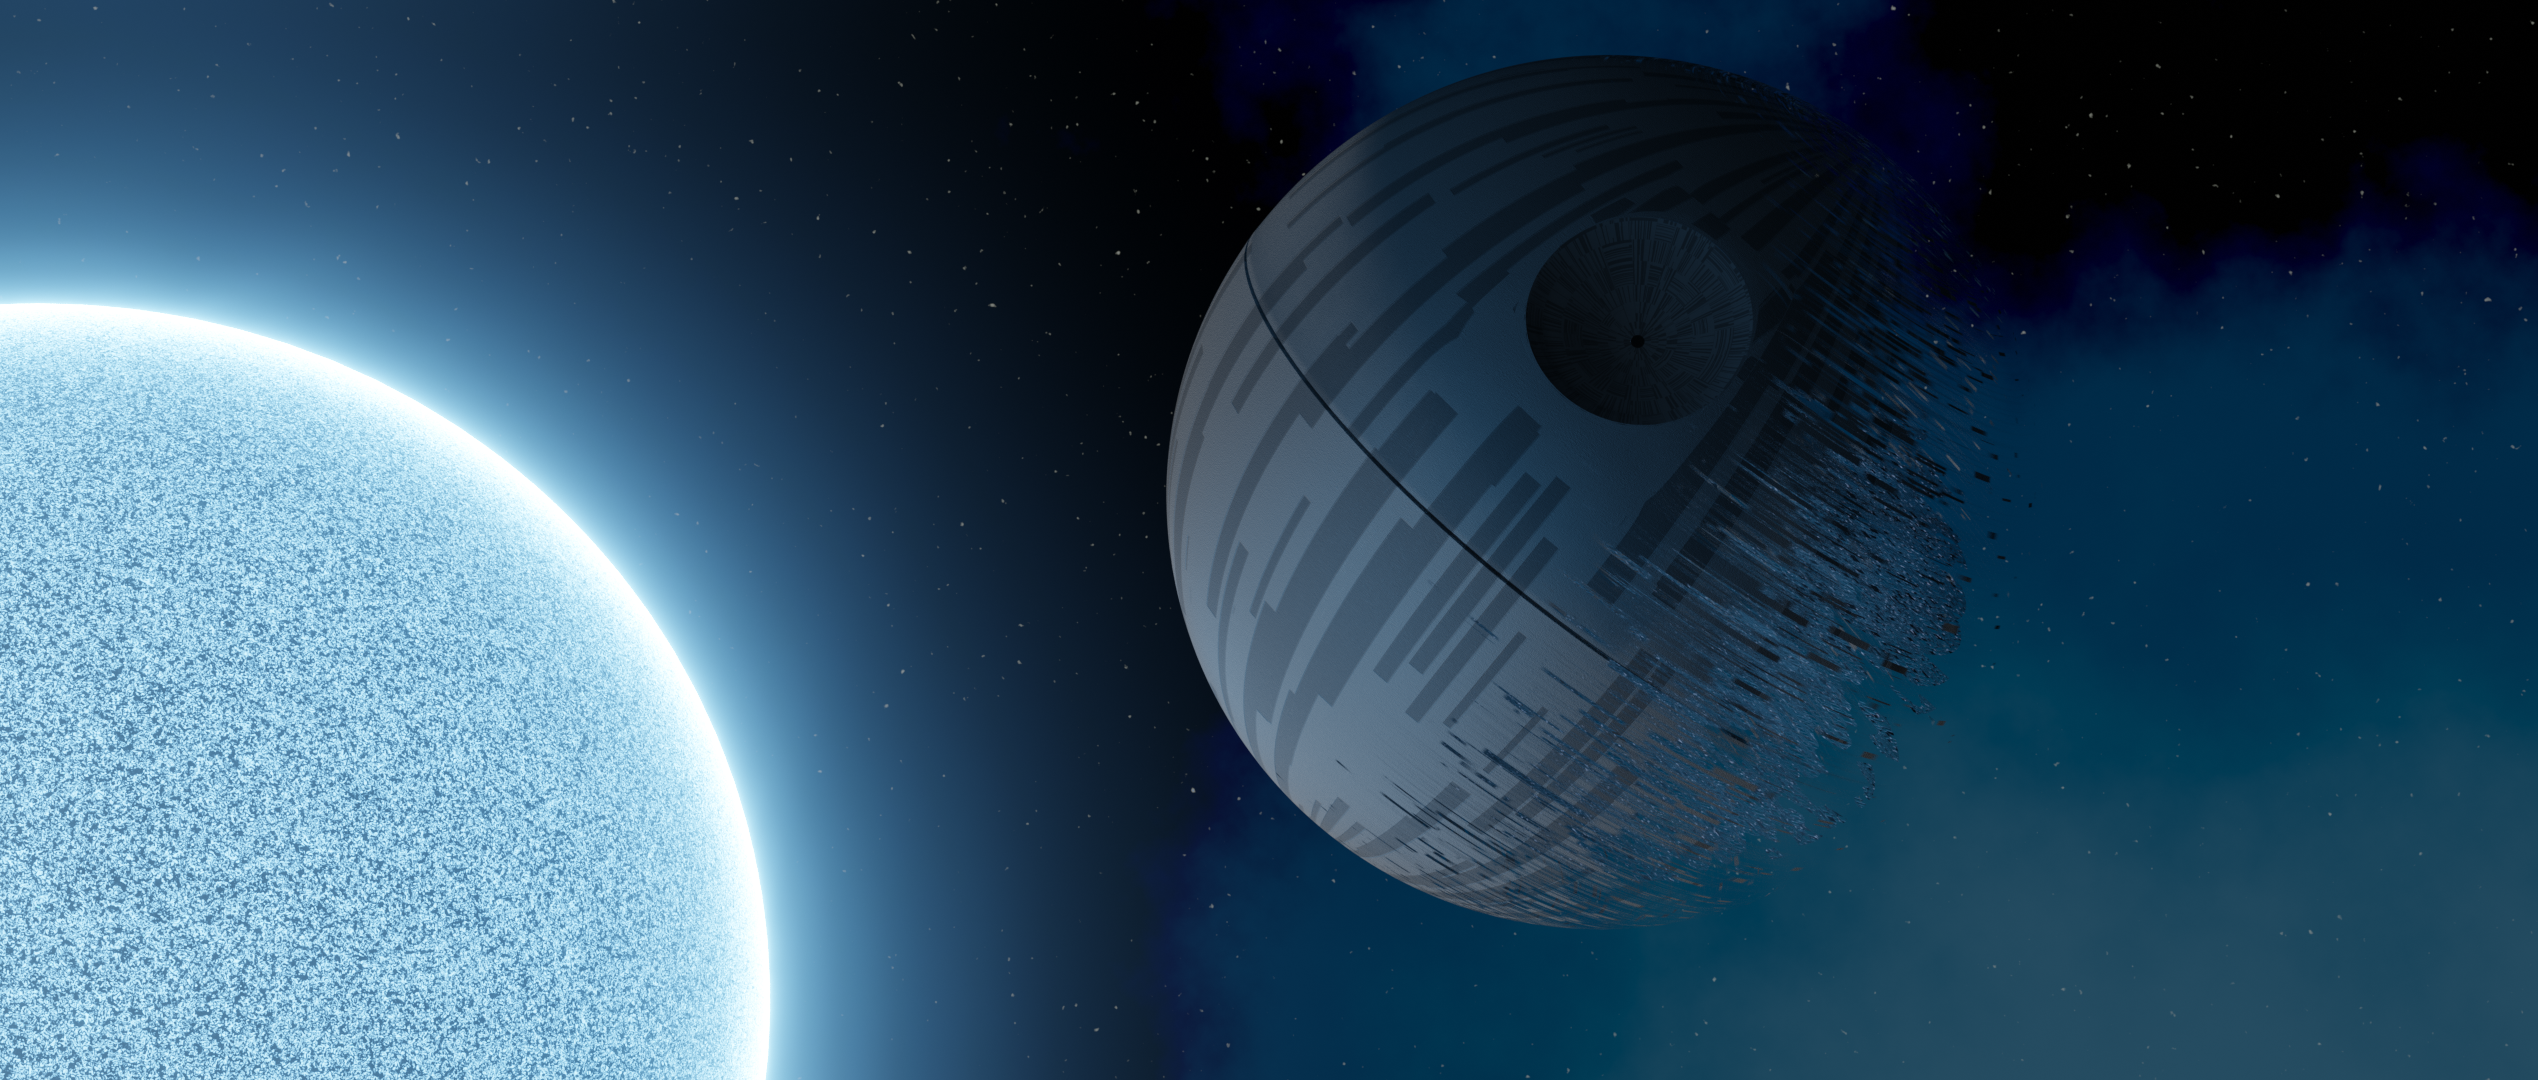 Star Wars Space Stars Blender Death Star Sun 3D Graphics Science Fiction Space Clouds Space Art 2538x1080